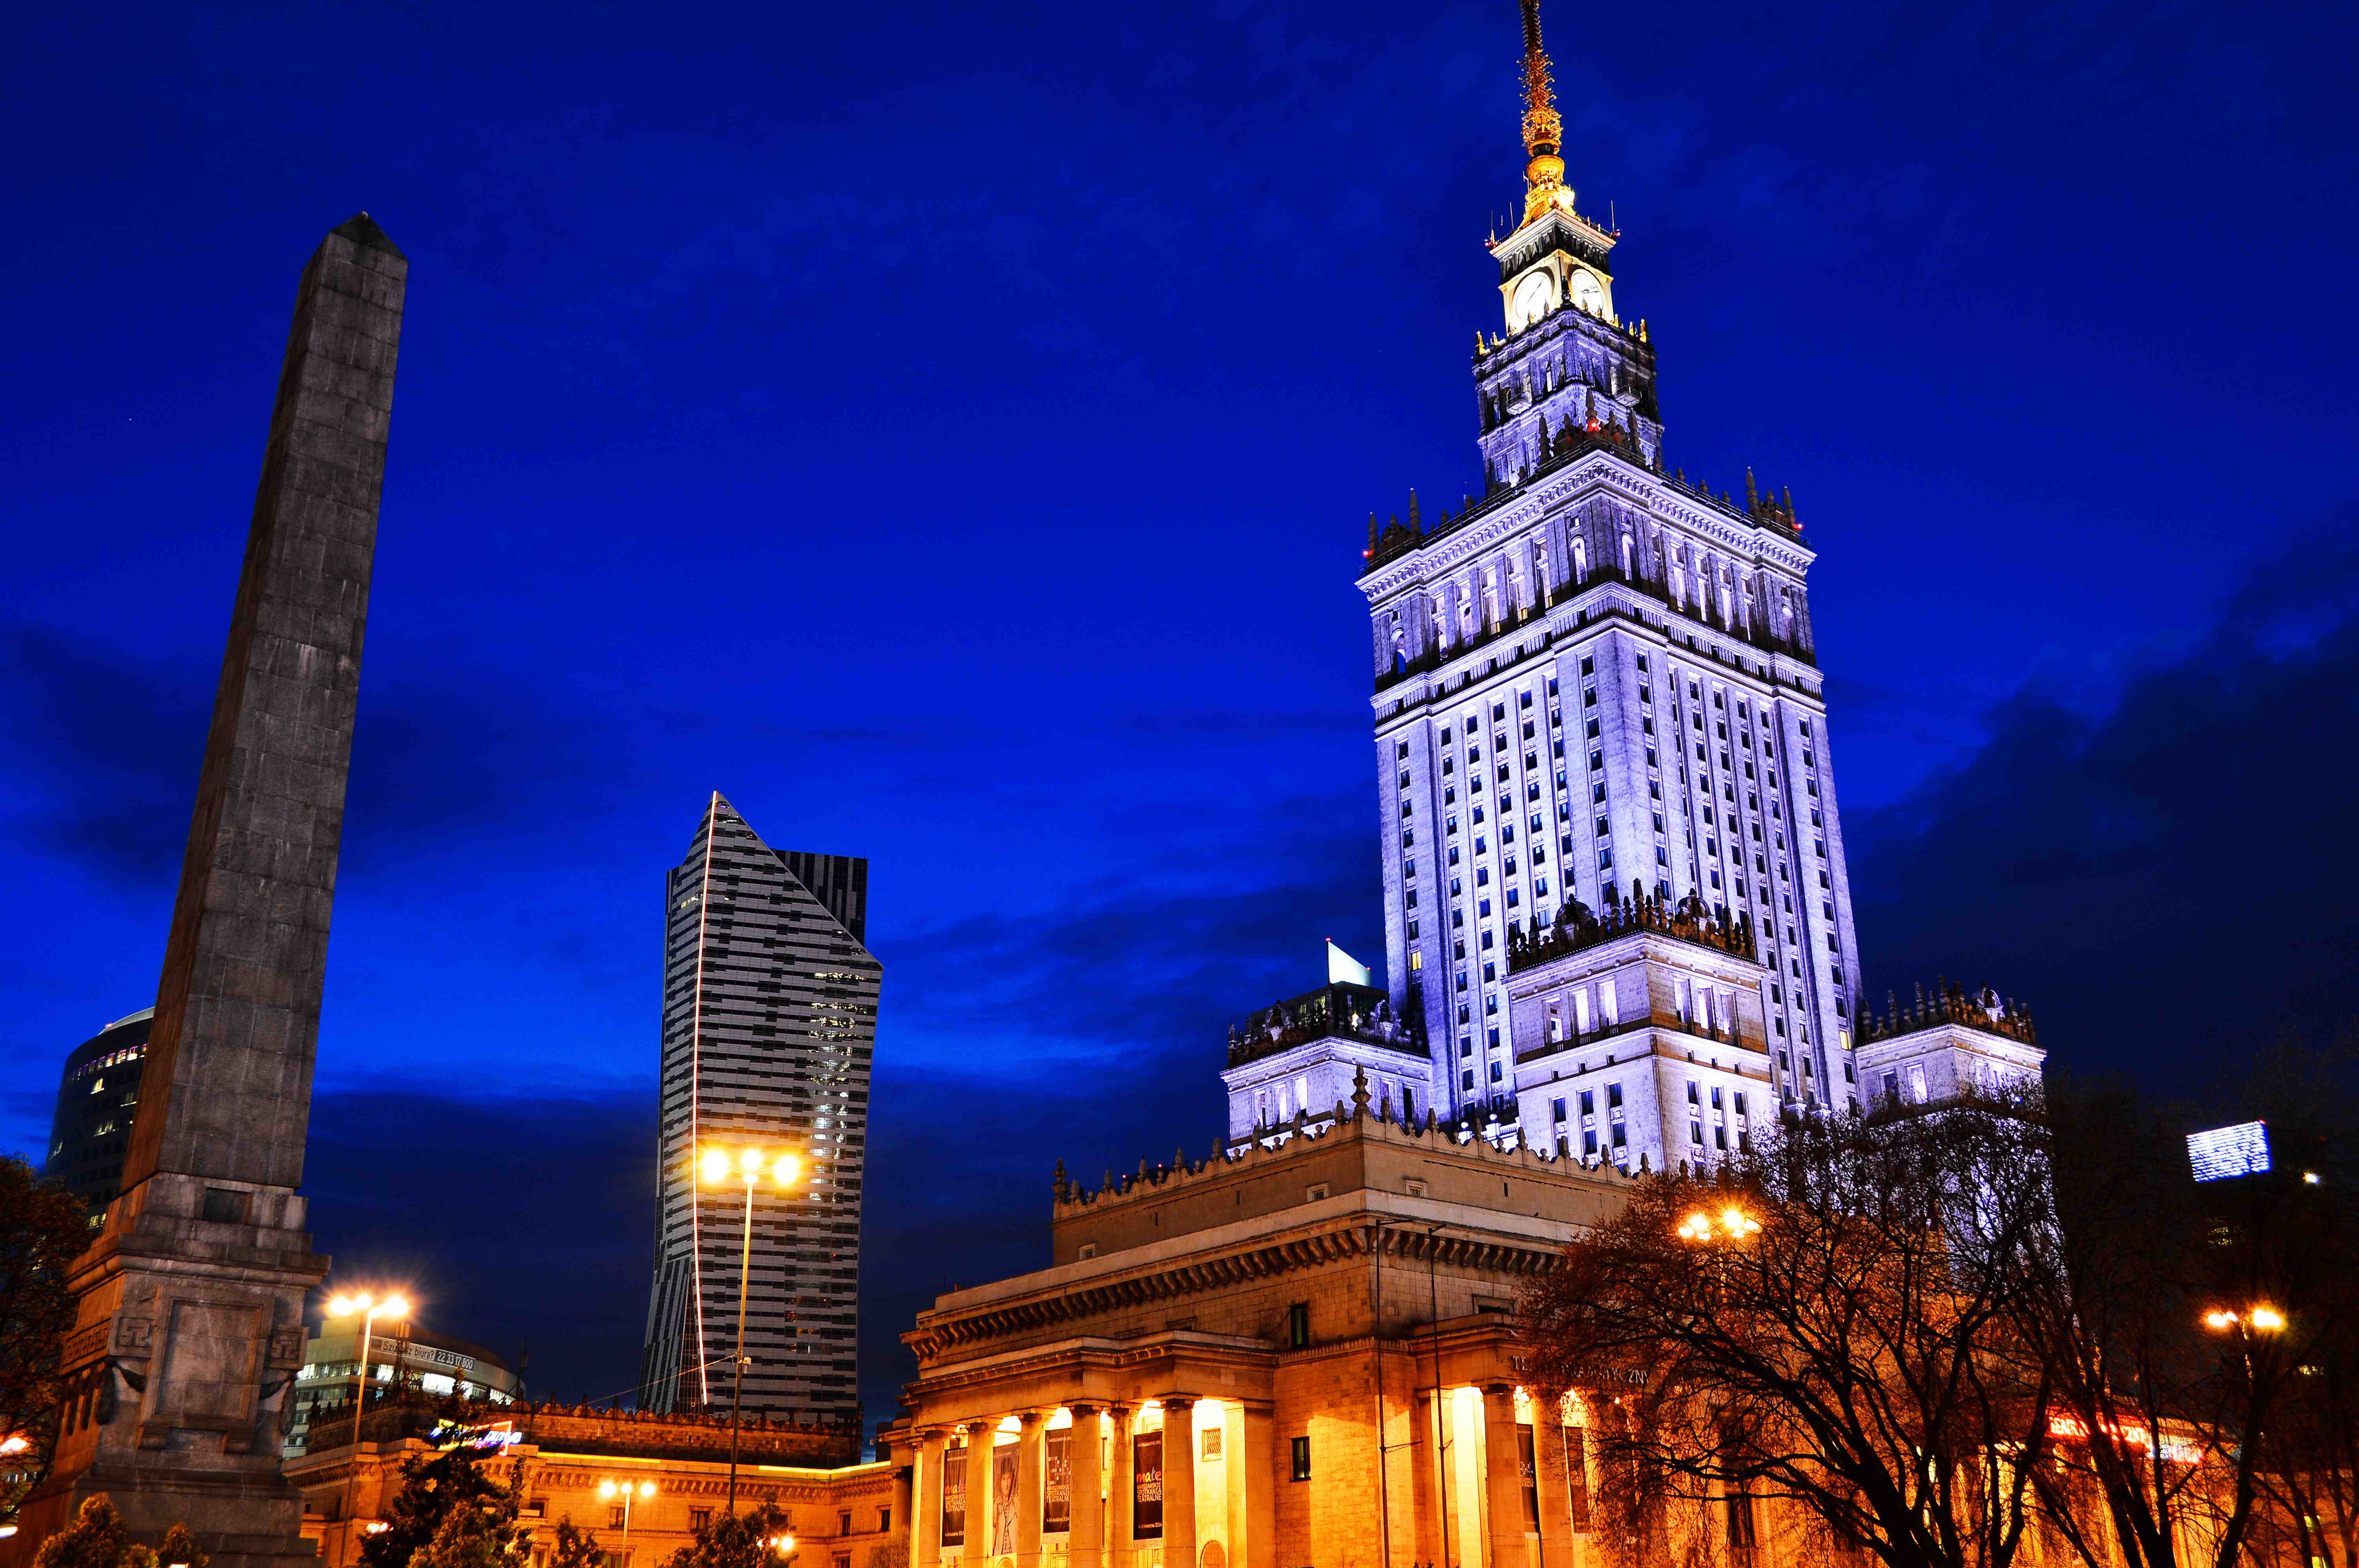 Palace of Culture and Science in Warsaw, Poland